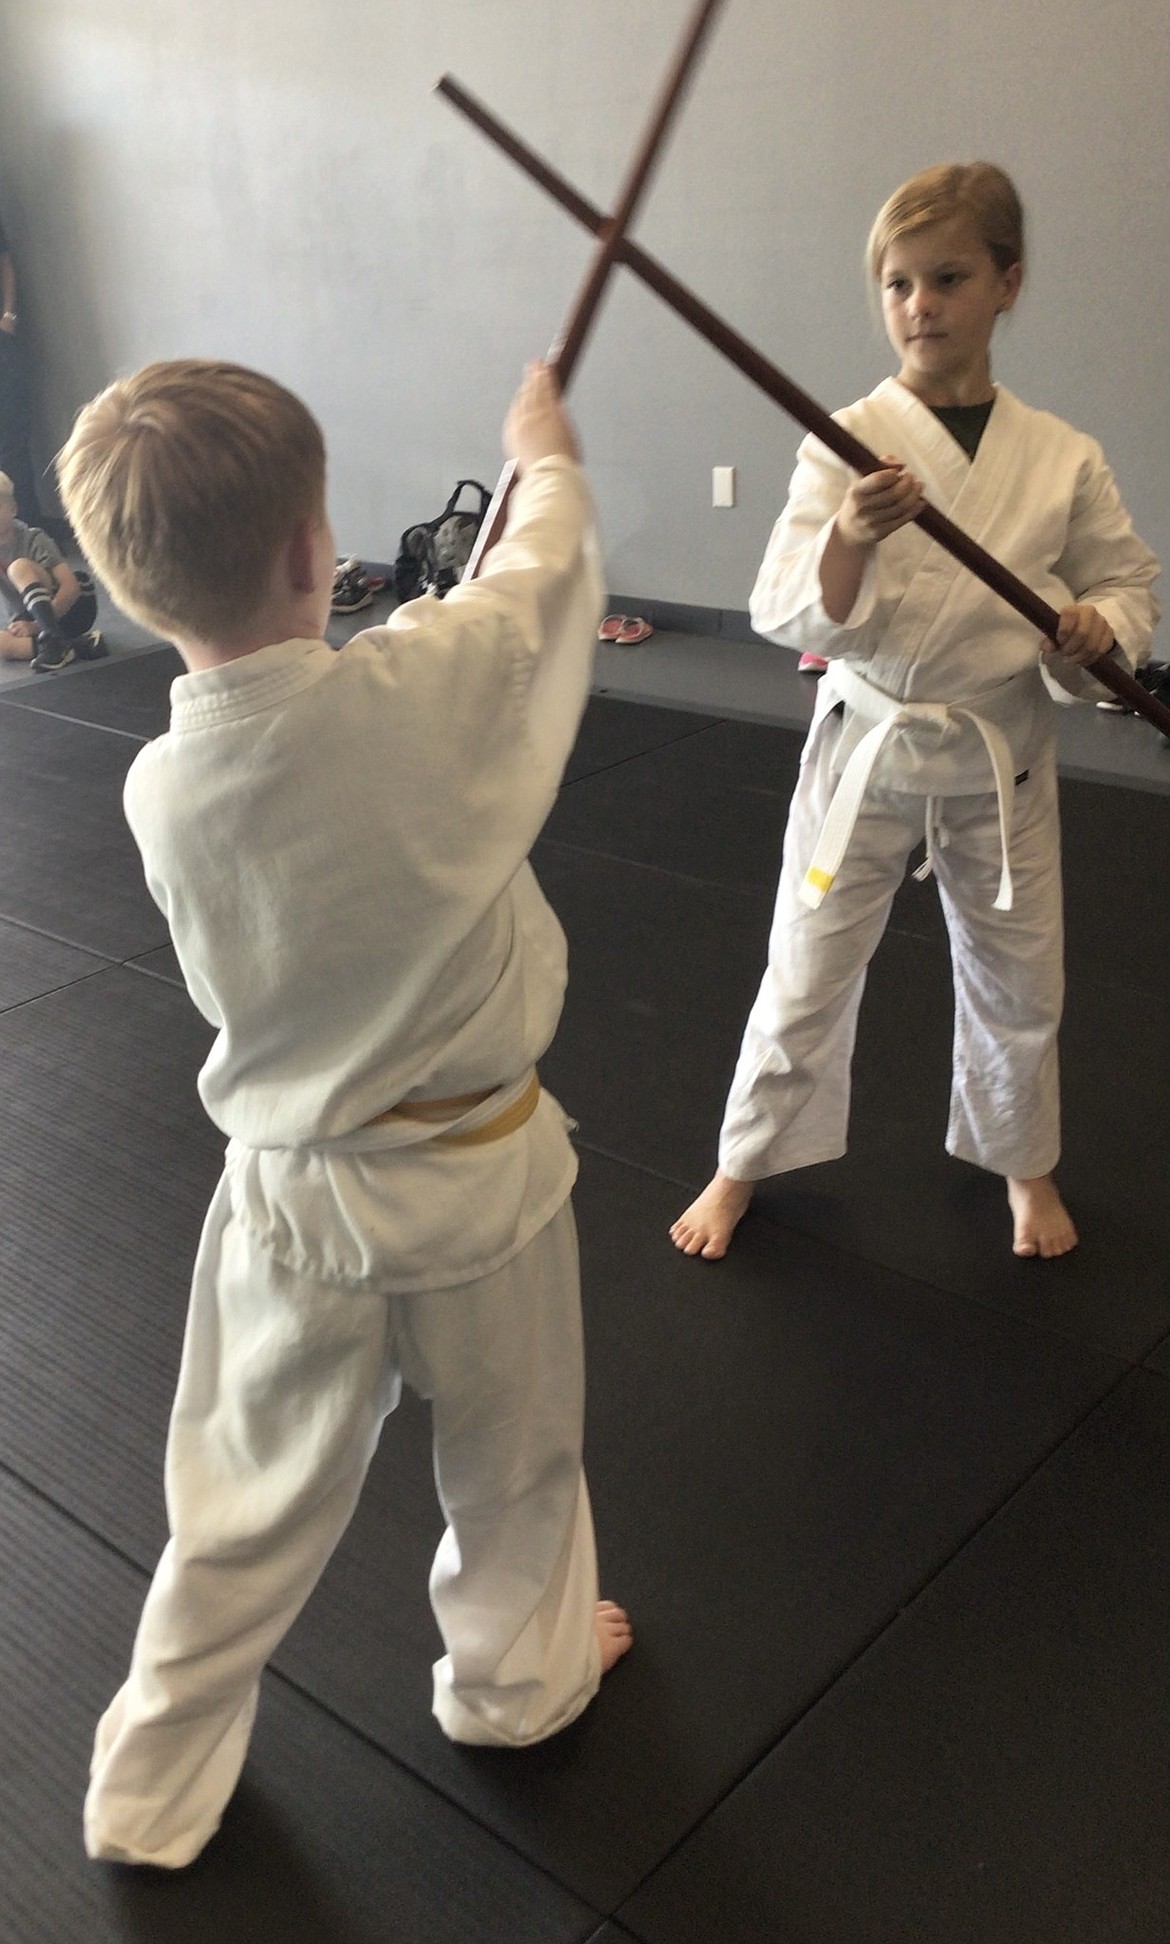 Students work with bo staffs during a class at Steel Wolf Karate. The dojo’s owner, Robert Heale, said martial arts is a passion that he enjoys sharing with his students, regardless of age.